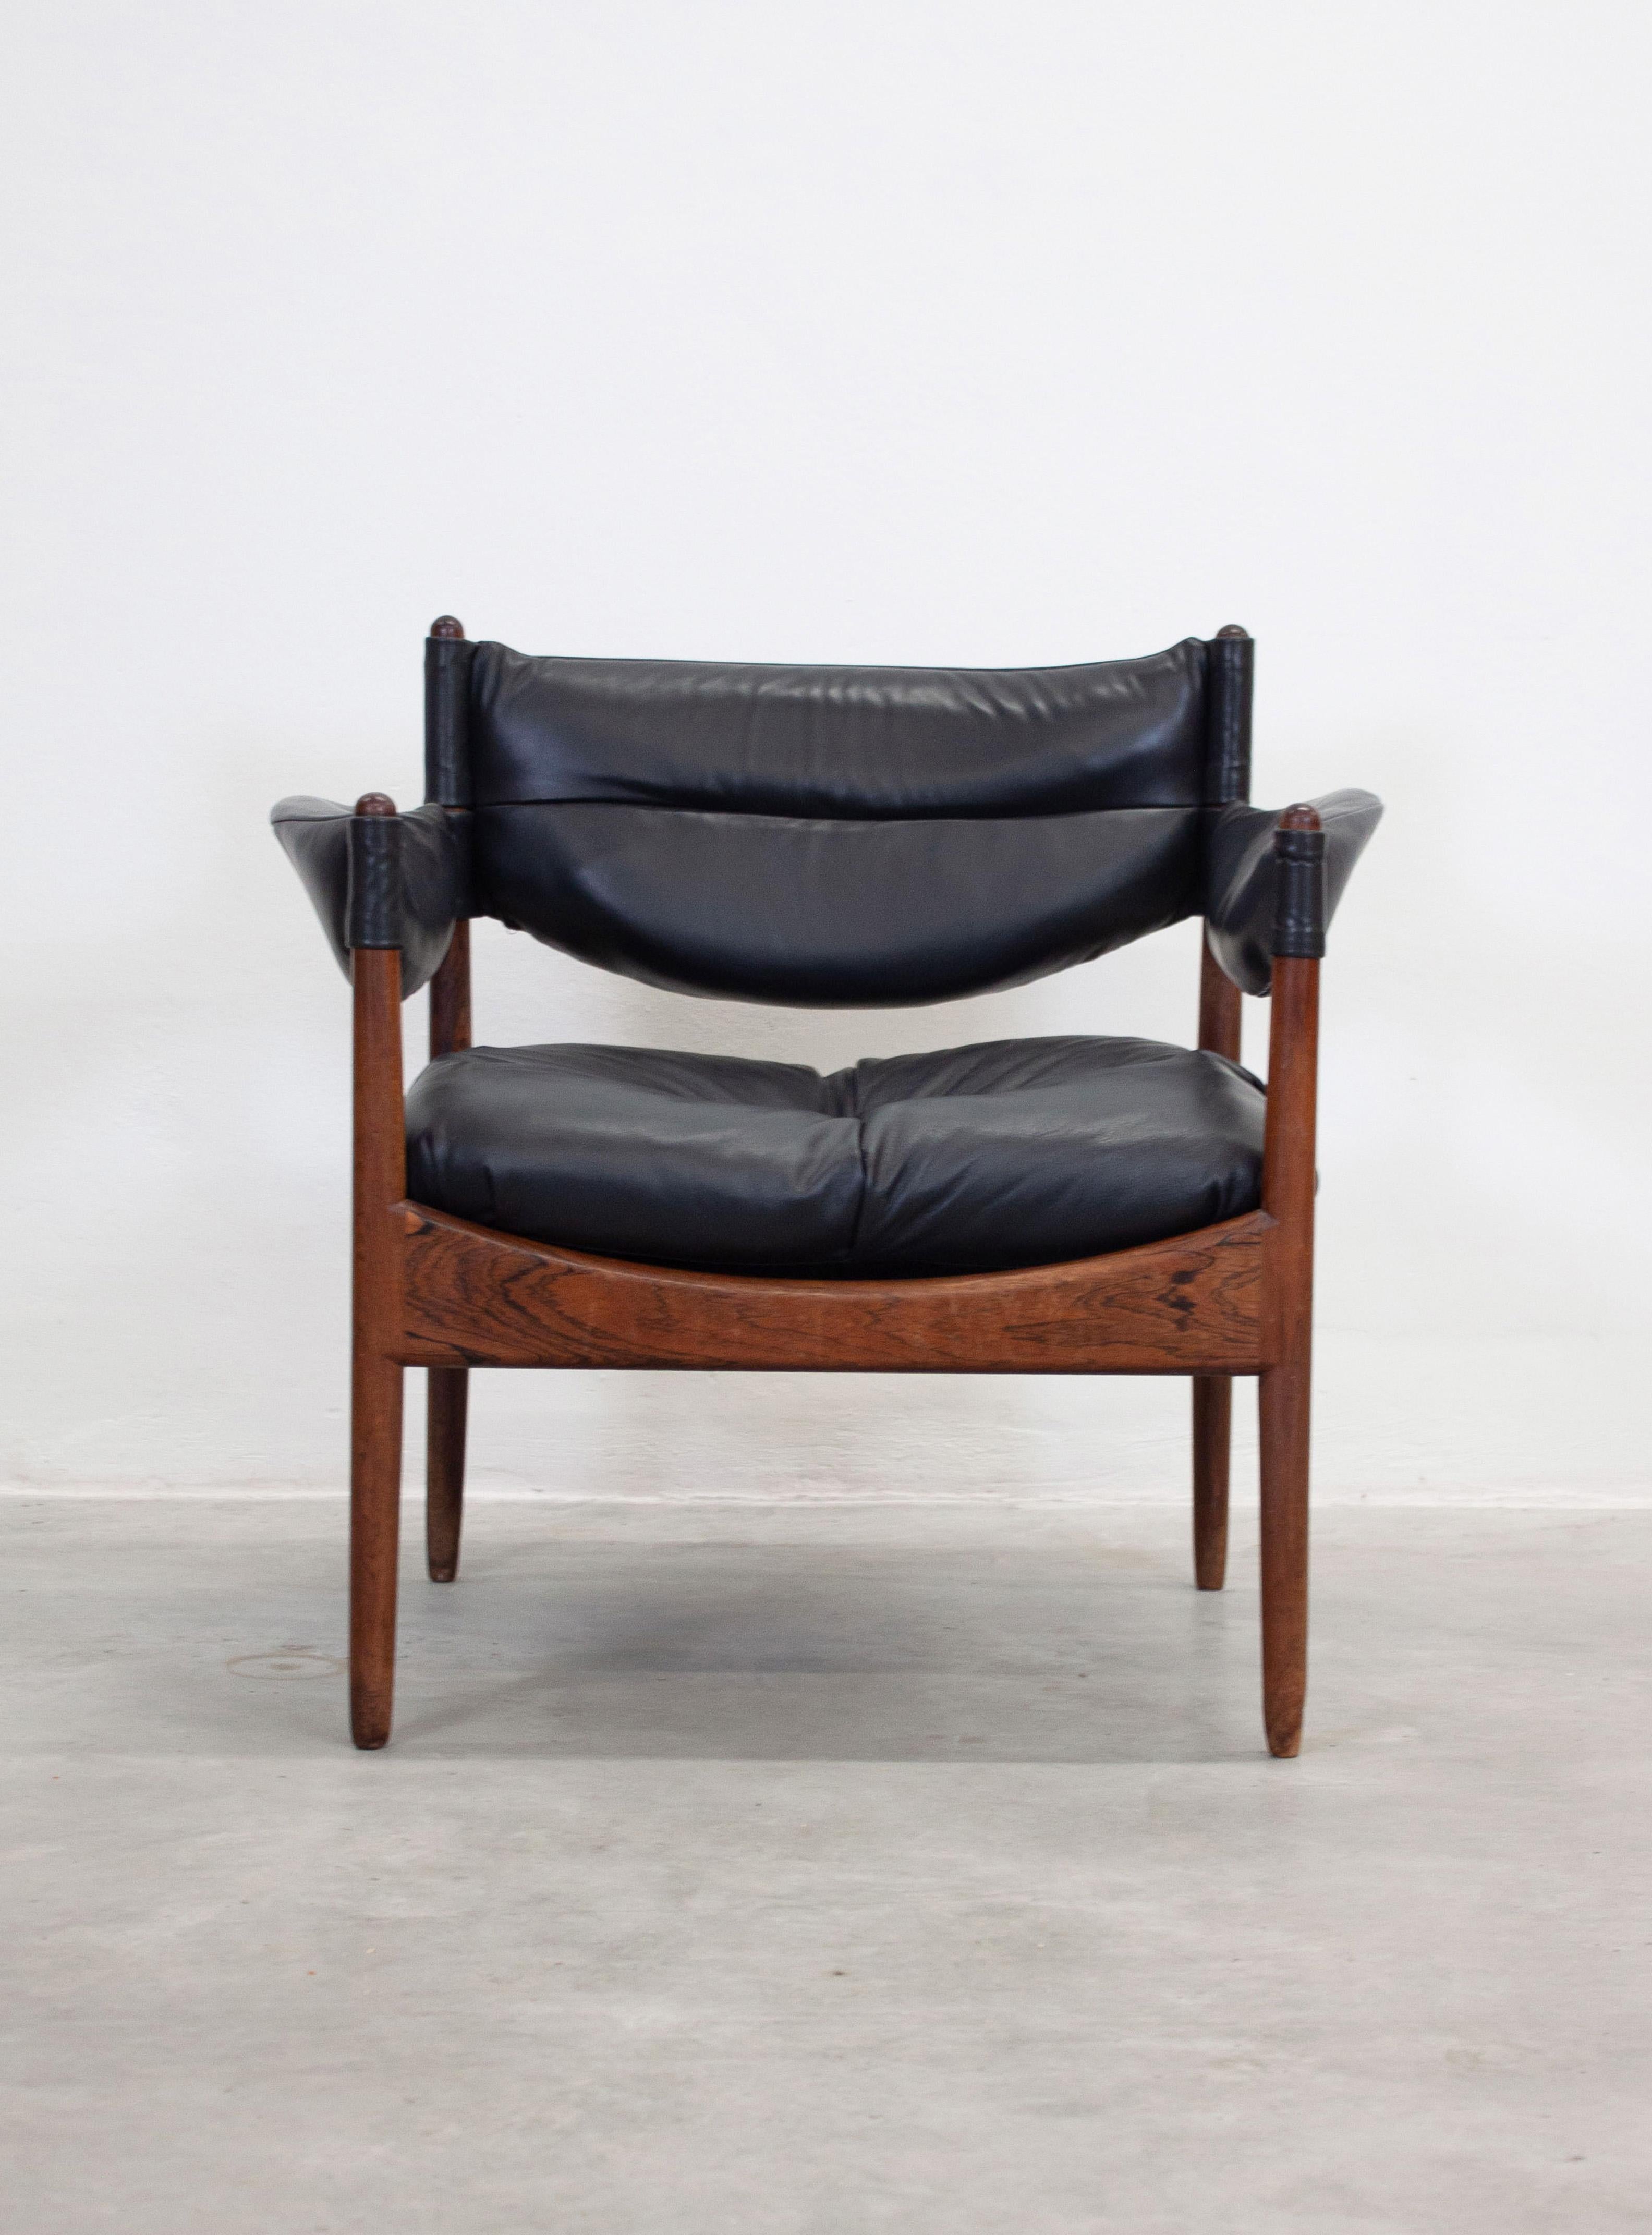 Beautiful Modus lounge chair designed by Kristian Vedel for Søren Willadsen. This beauty is made in Denmark in the 1960s and has been completely been reupholstered by the amazing Nu-Design. When we received the chair all cushions and leather were